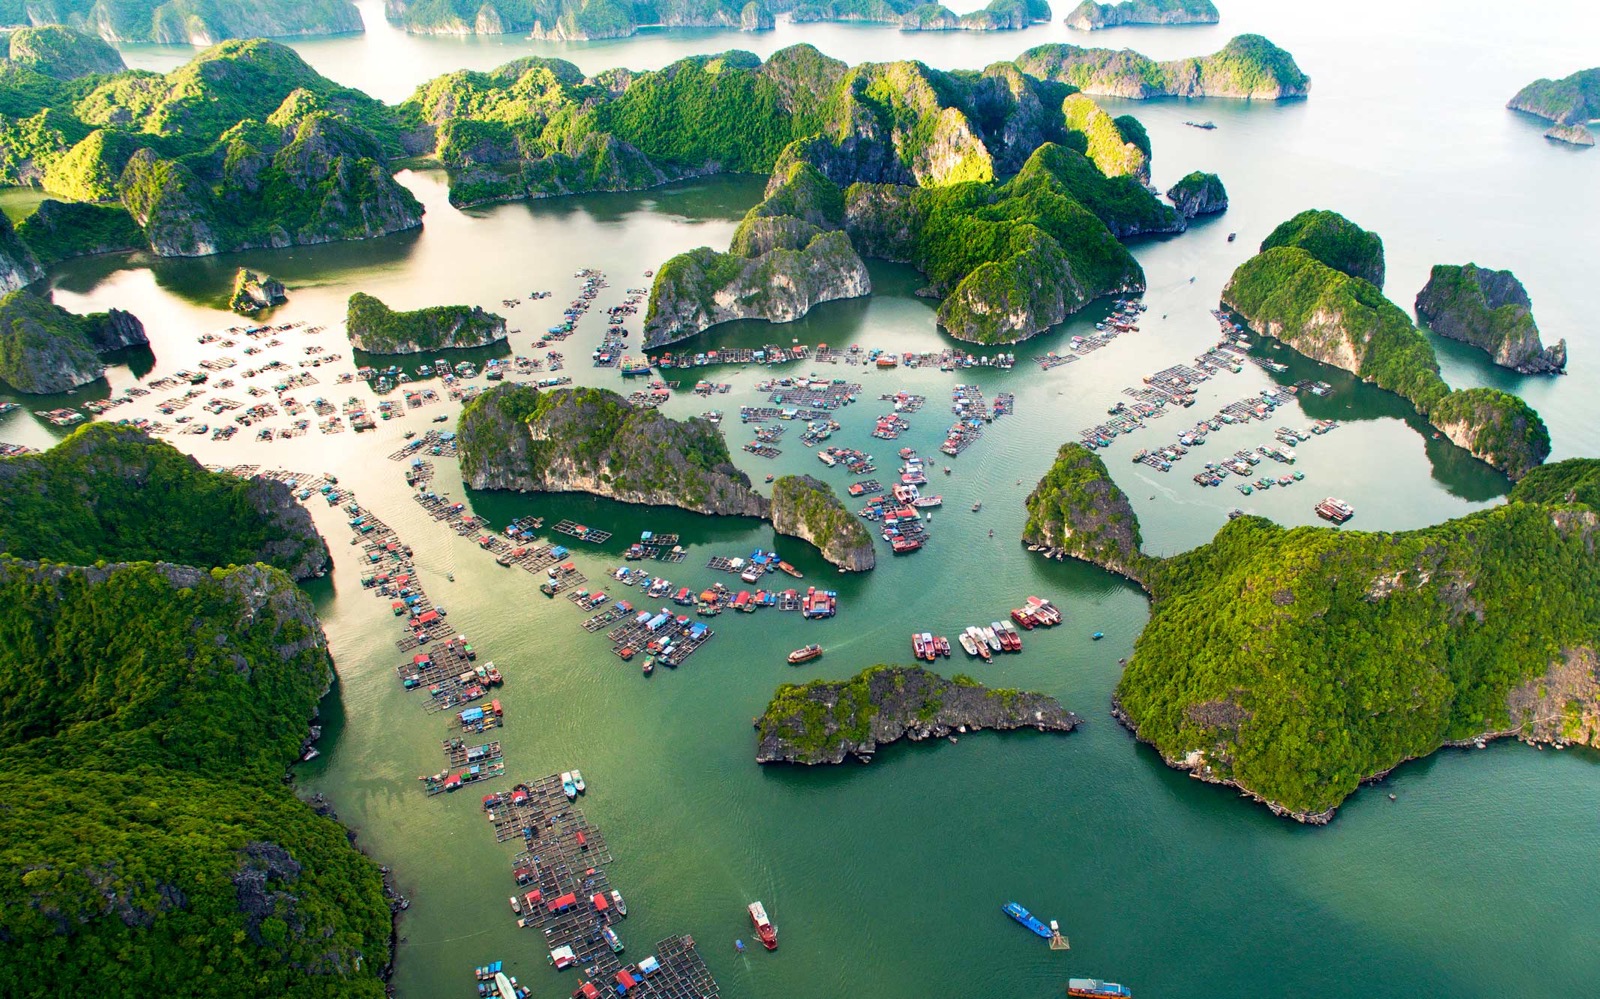 Can You Match These Extraordinary Natural Features to Their Respective Countries? Ha Long Bay, Vietnam